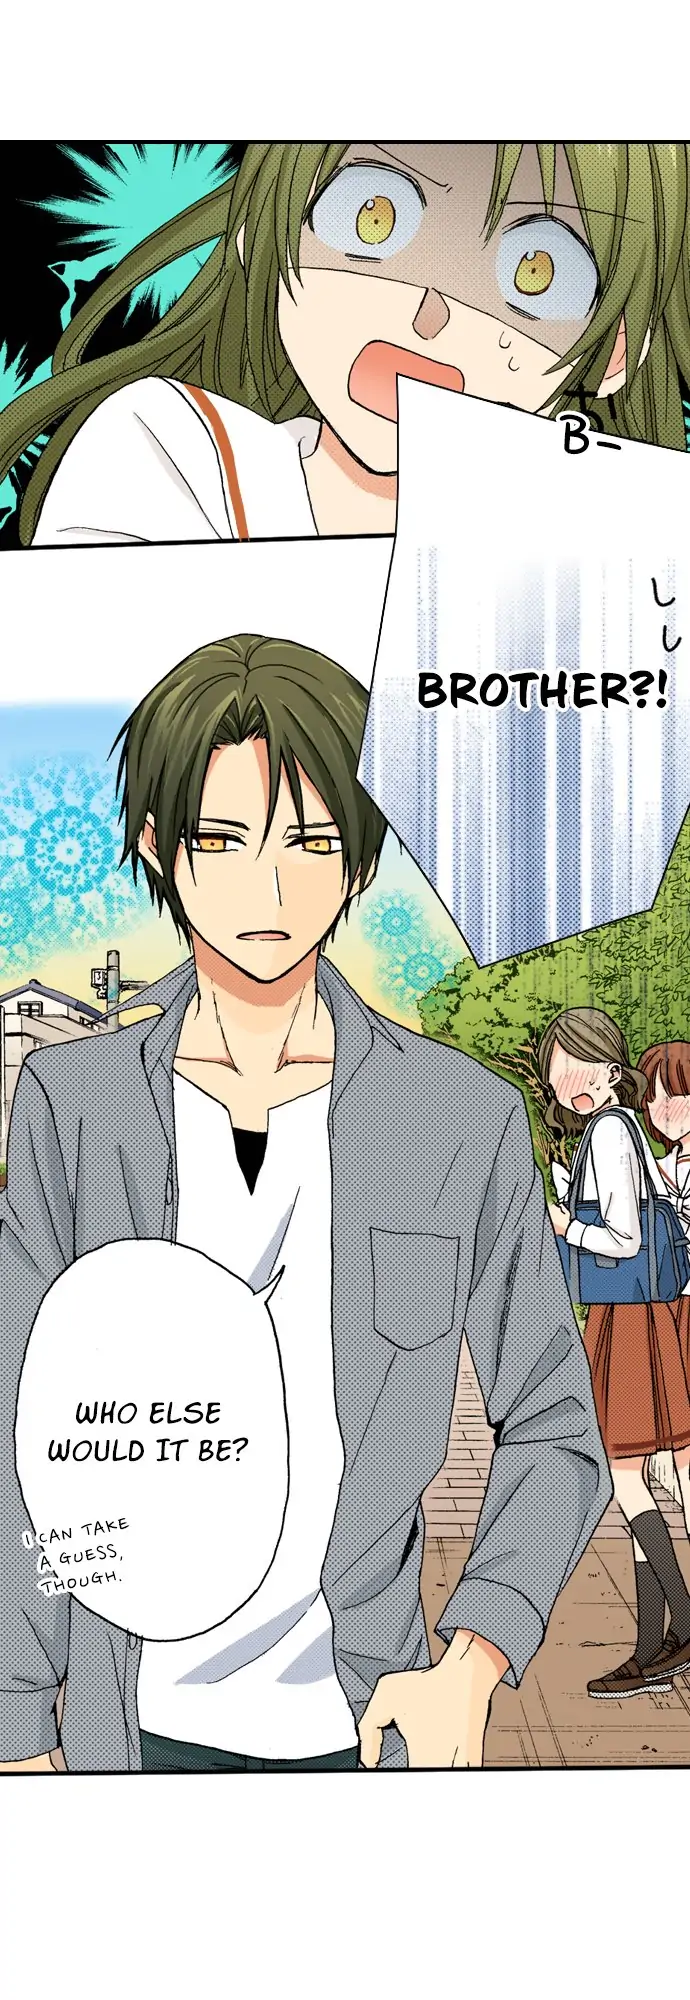 AniTomo - My Brother's Friend - chapter 95 - #5